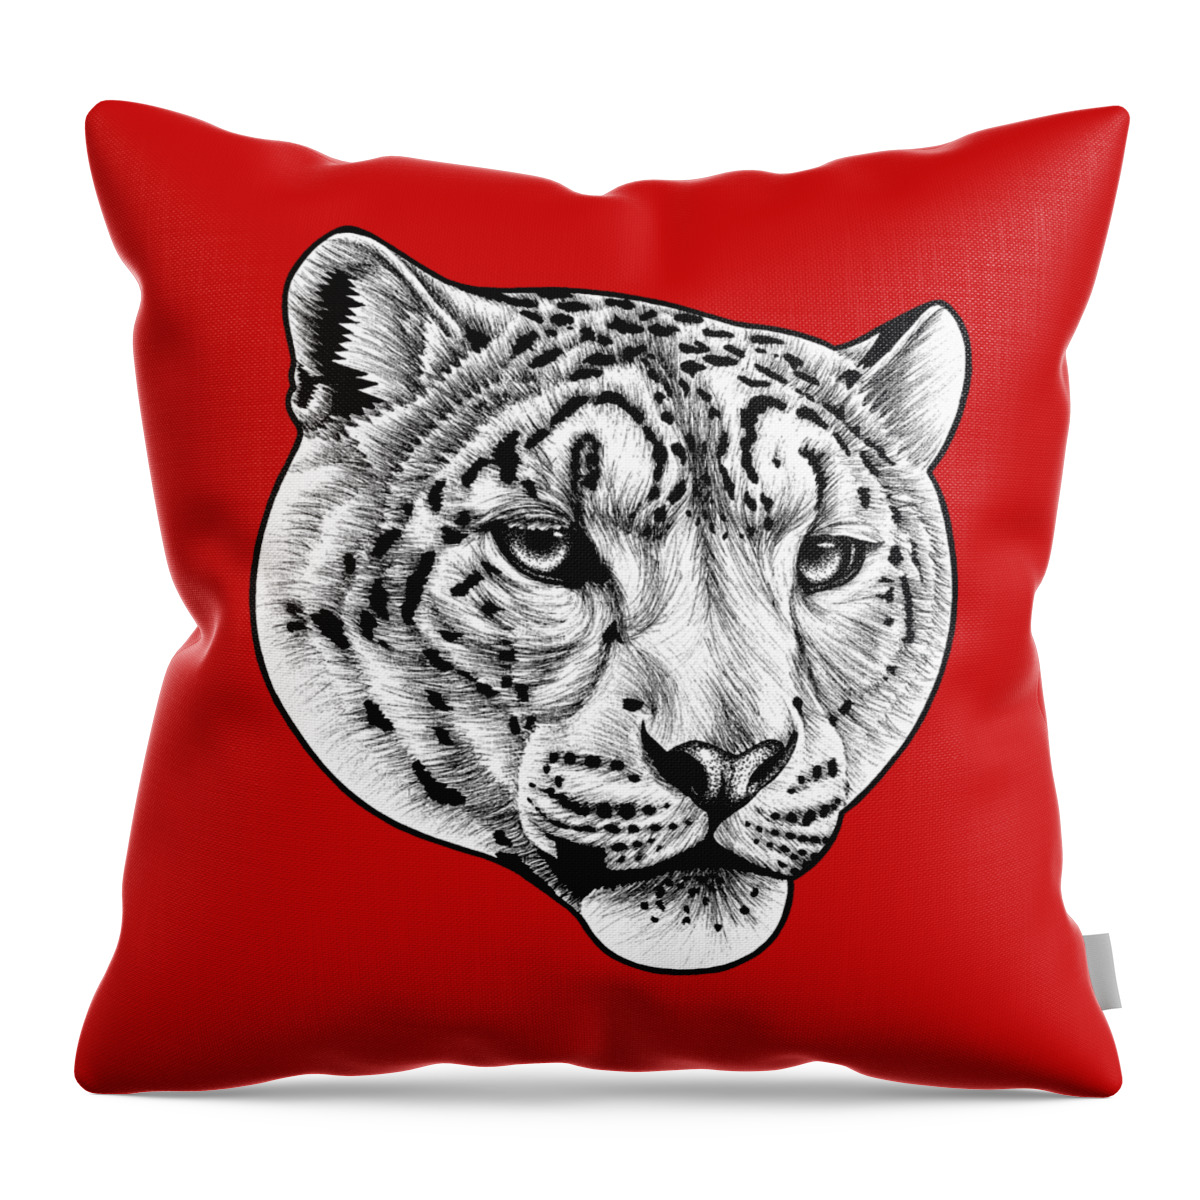 Leopard Throw Pillow featuring the drawing Snow leopard - ink illustration by Loren Dowding